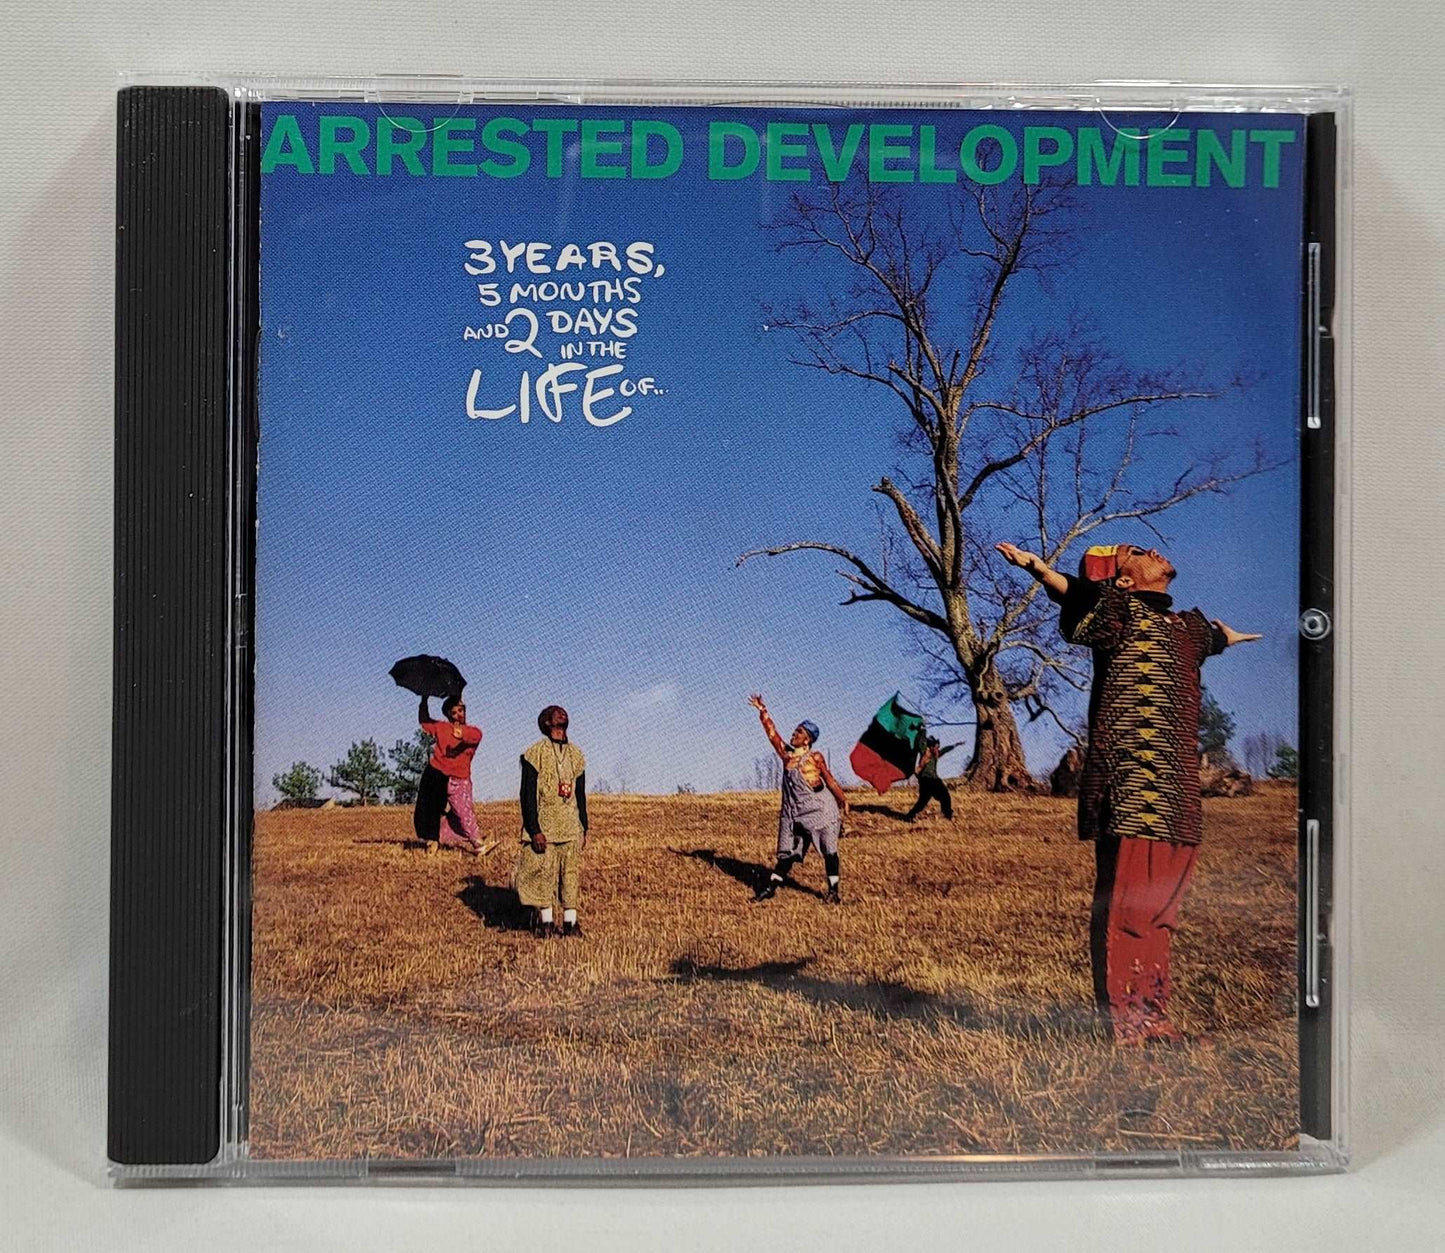 Arrested Development - 3 Years, 5 Months & 2 Days in the Life Of... [1992 CD]